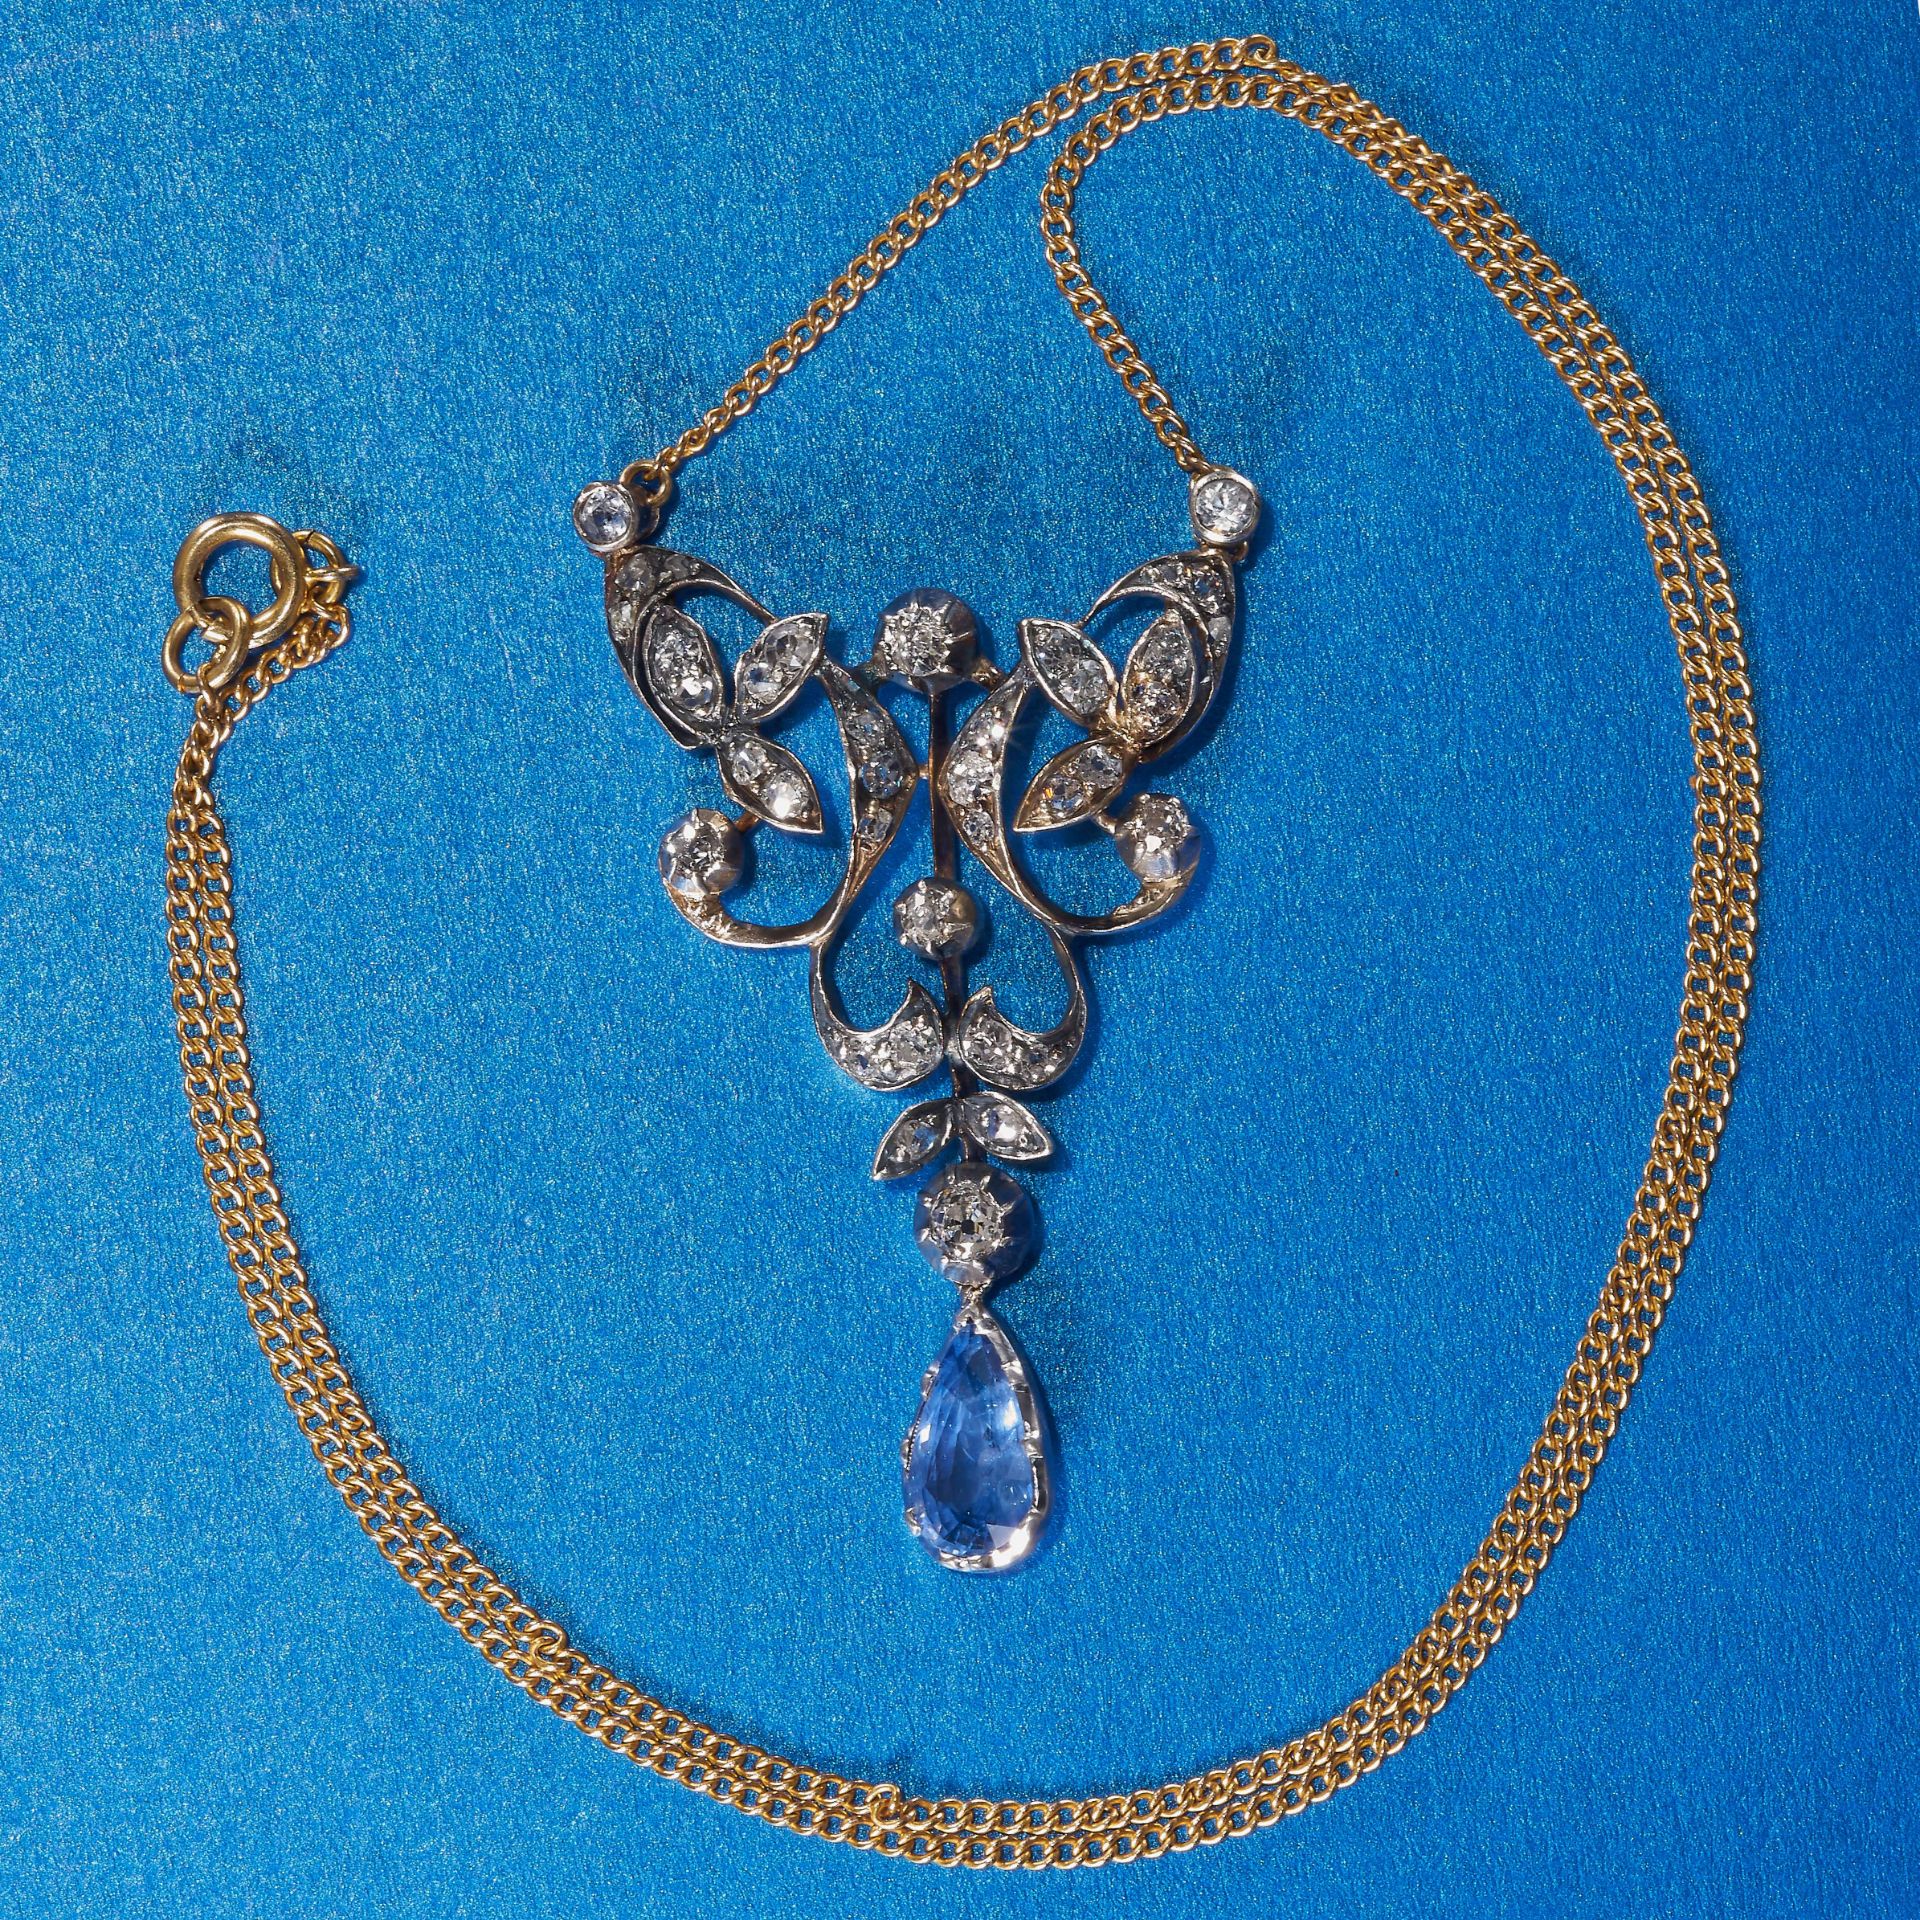 ANTIQUE SAPPHIRE AND DIAMOND PENDANT NECKLACE - Image 2 of 2